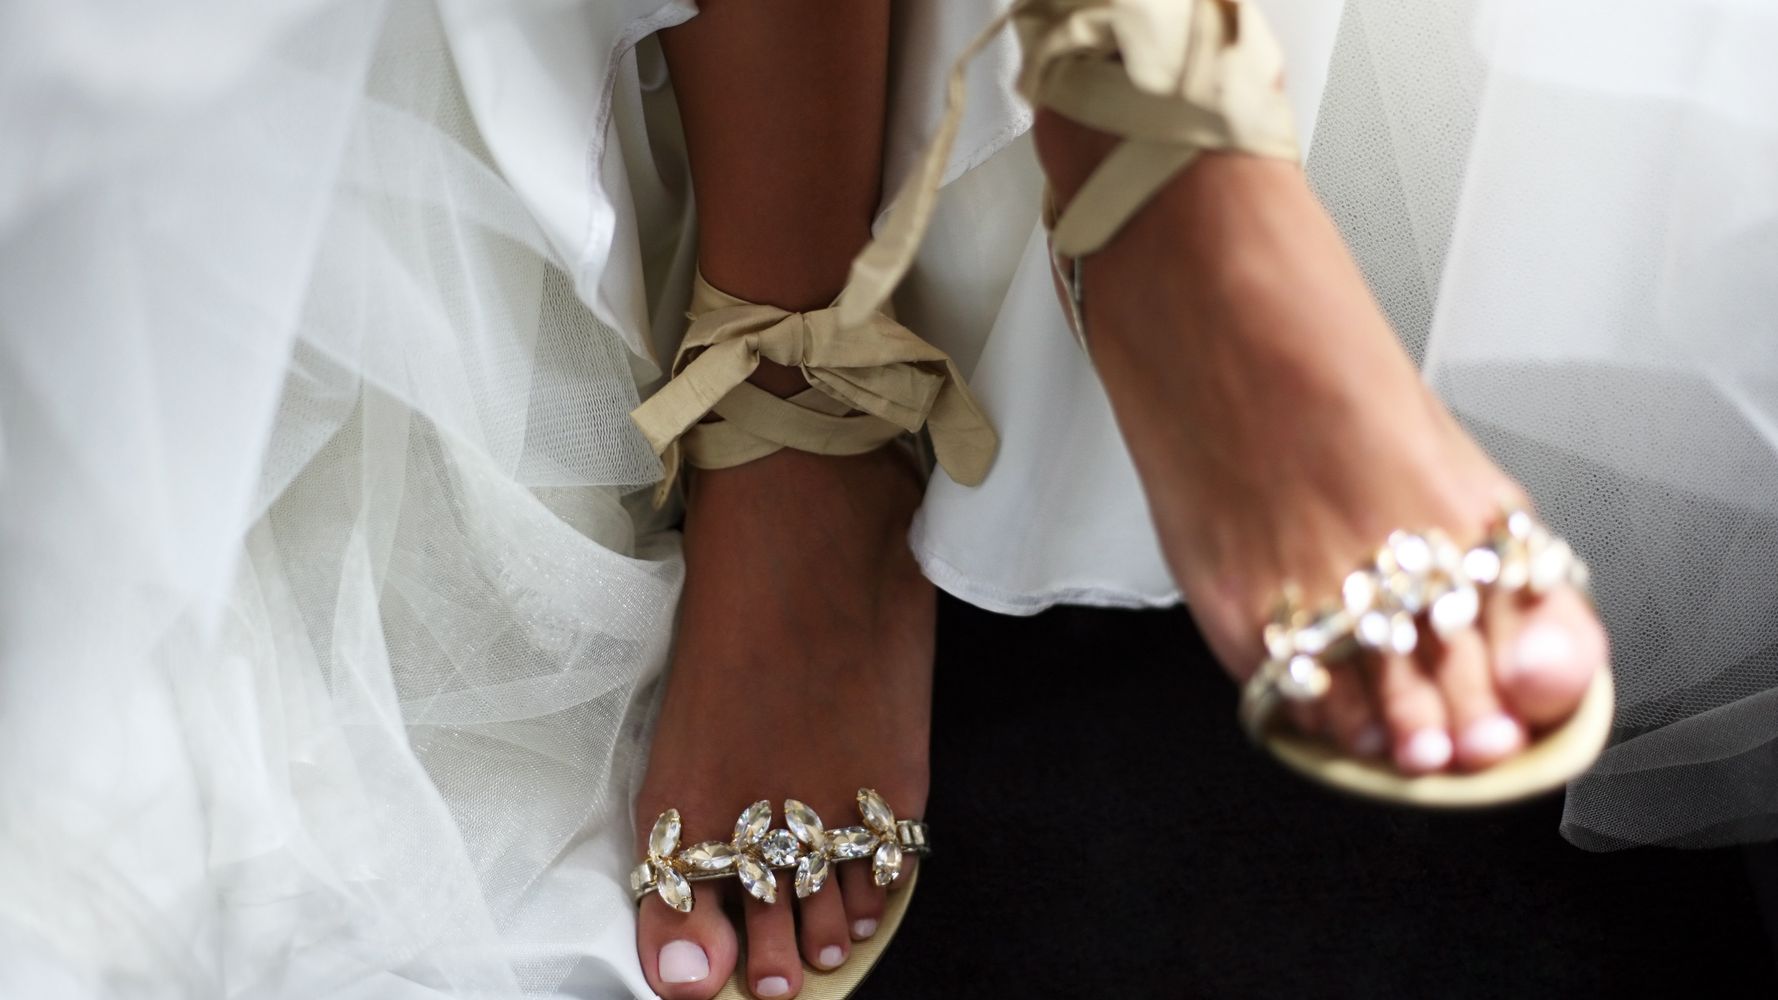 11 Bridal Shoe Brands To Shop For Your Wedding Day In Australia